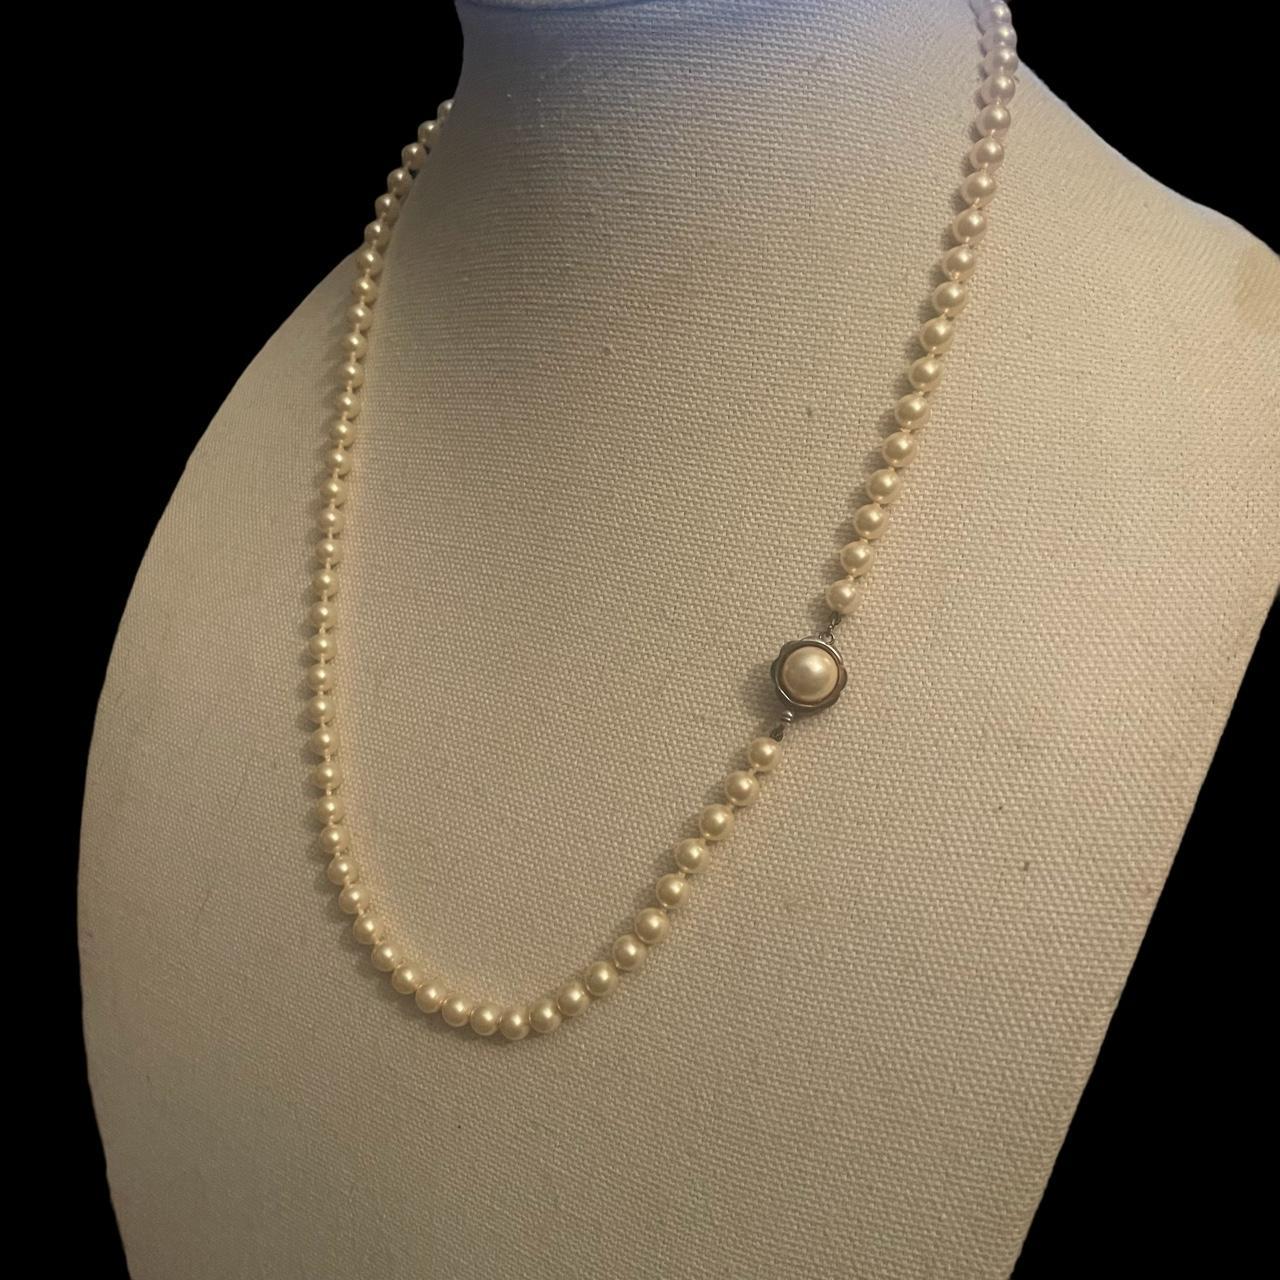 Louis Vuitton Pearl necklace! Reworked with vintage - Depop